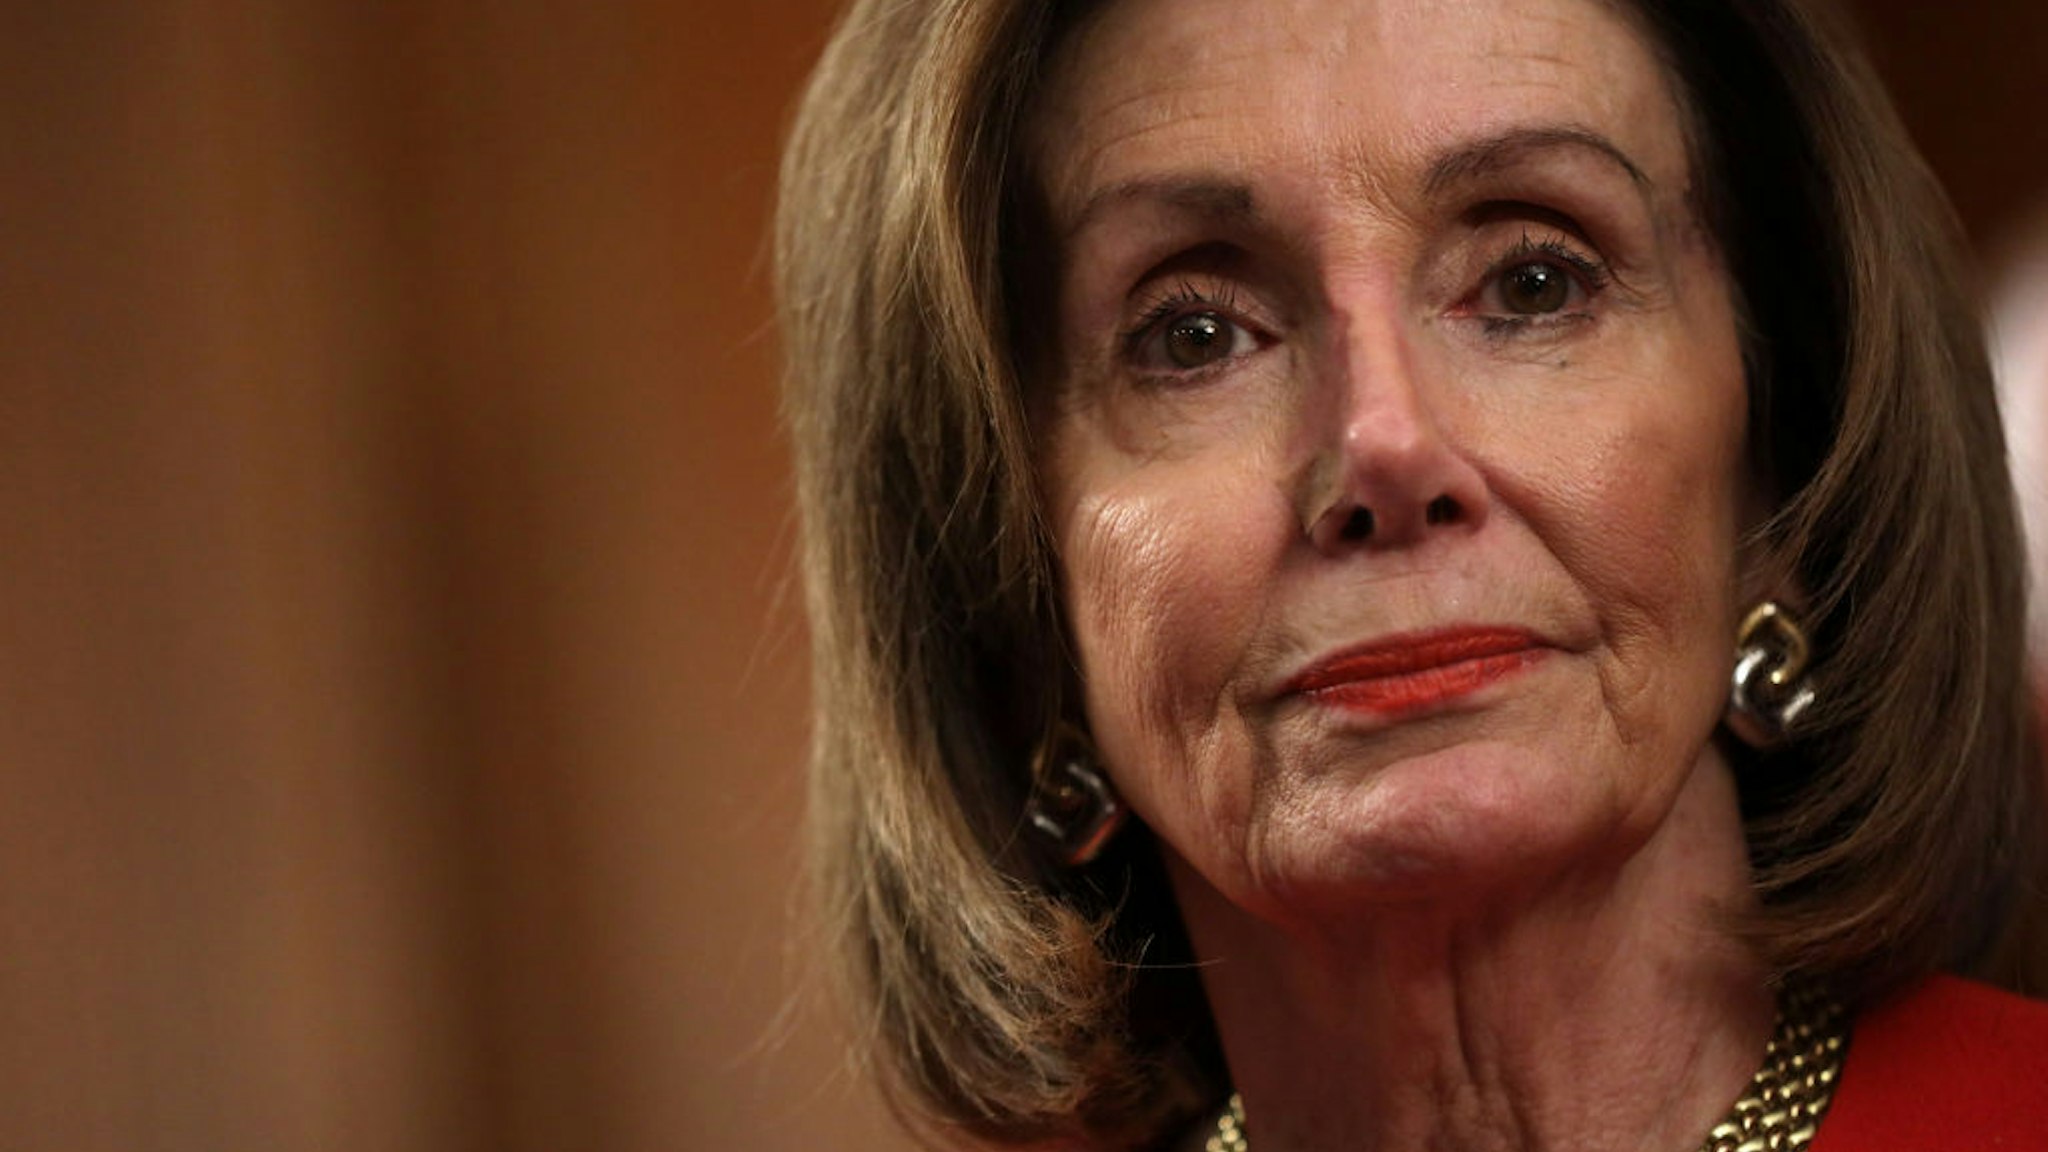 U.S. Speaker of the House Rep. Nancy Pelosi (D-CA) listens during an event at the Rayburn Room of the U.S. Capitol December 19, 2019 in Washington, DC. House Democrats held an event celebrating the "legislative progress the House Democratic Majority has made For The People in 2019.‚Äù (Photo by Alex Wong/Getty Images)